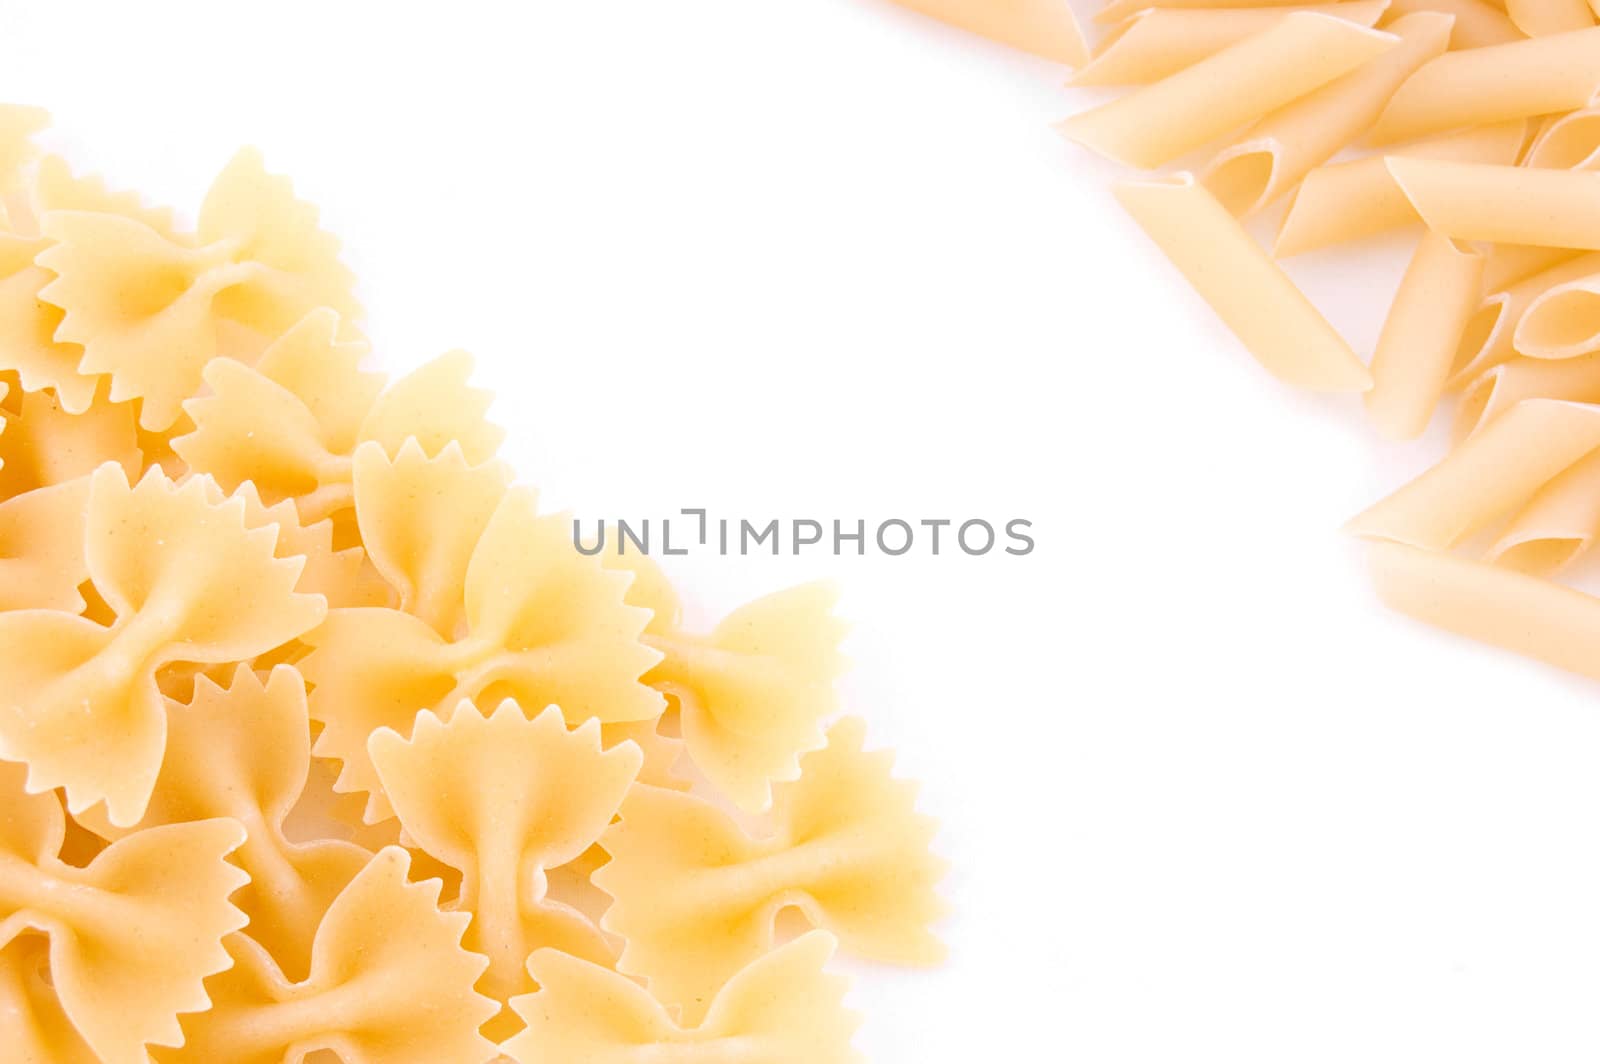 Some kinds of uncooked pasta background